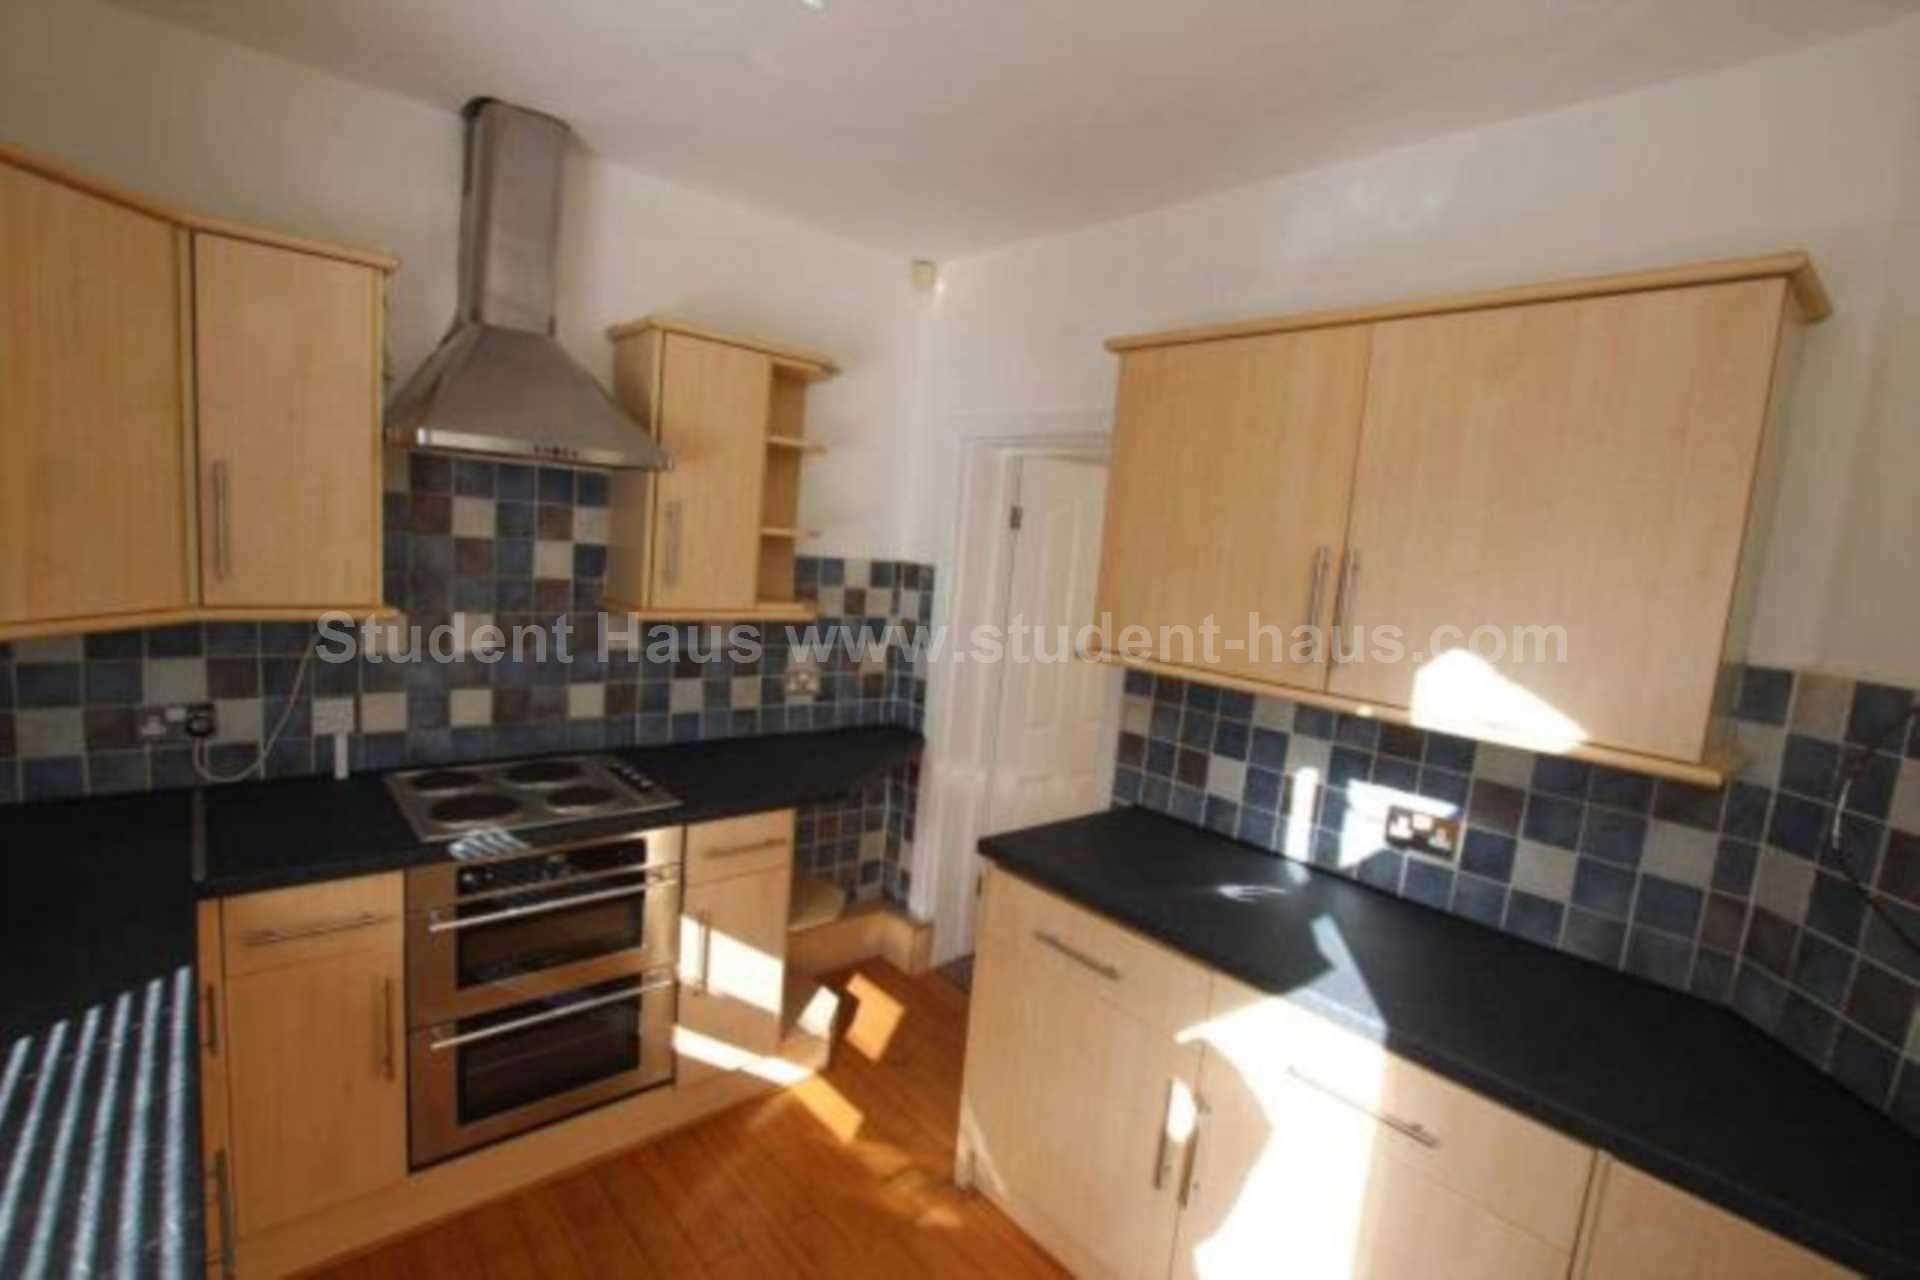 3 bed House (unspecified) for rent in Salford. From Student Haus